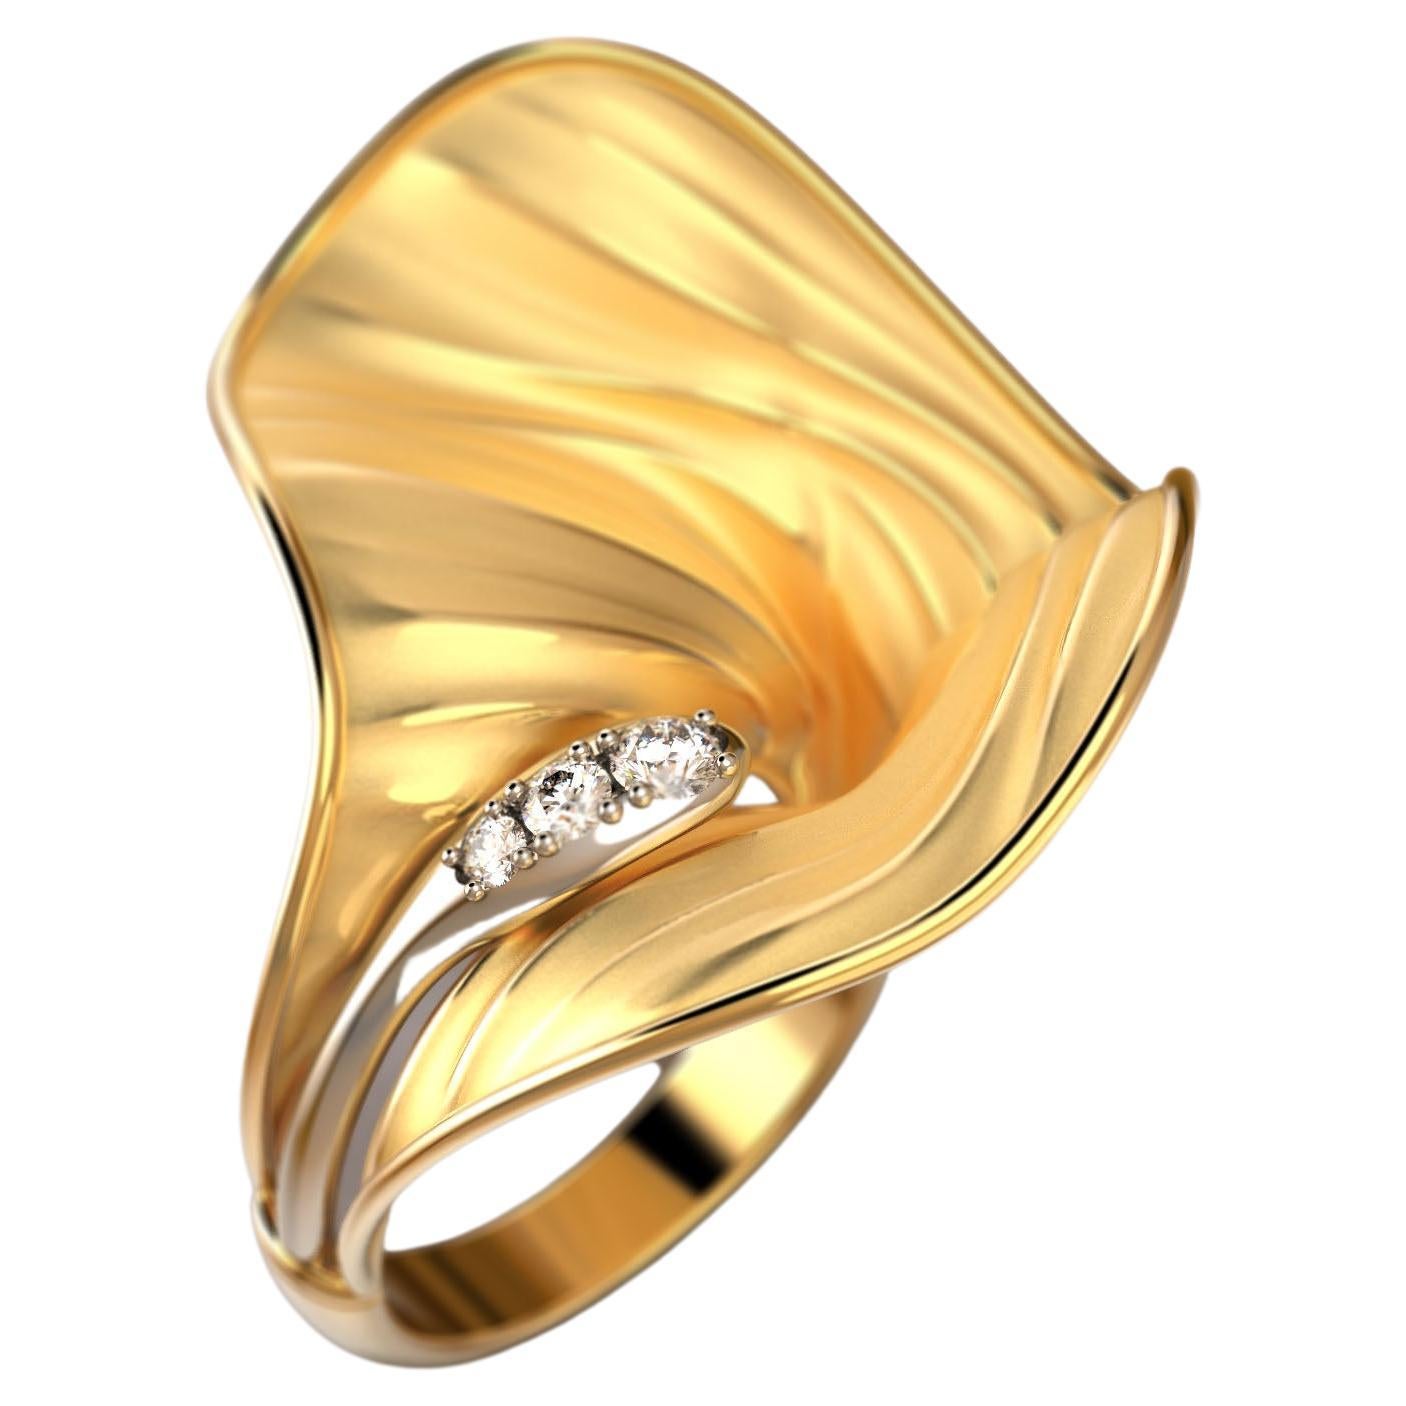 For Sale:  Oltremare Gioielli 18k Gold Ring with Diamonds, Made in Italy Diamond Ring